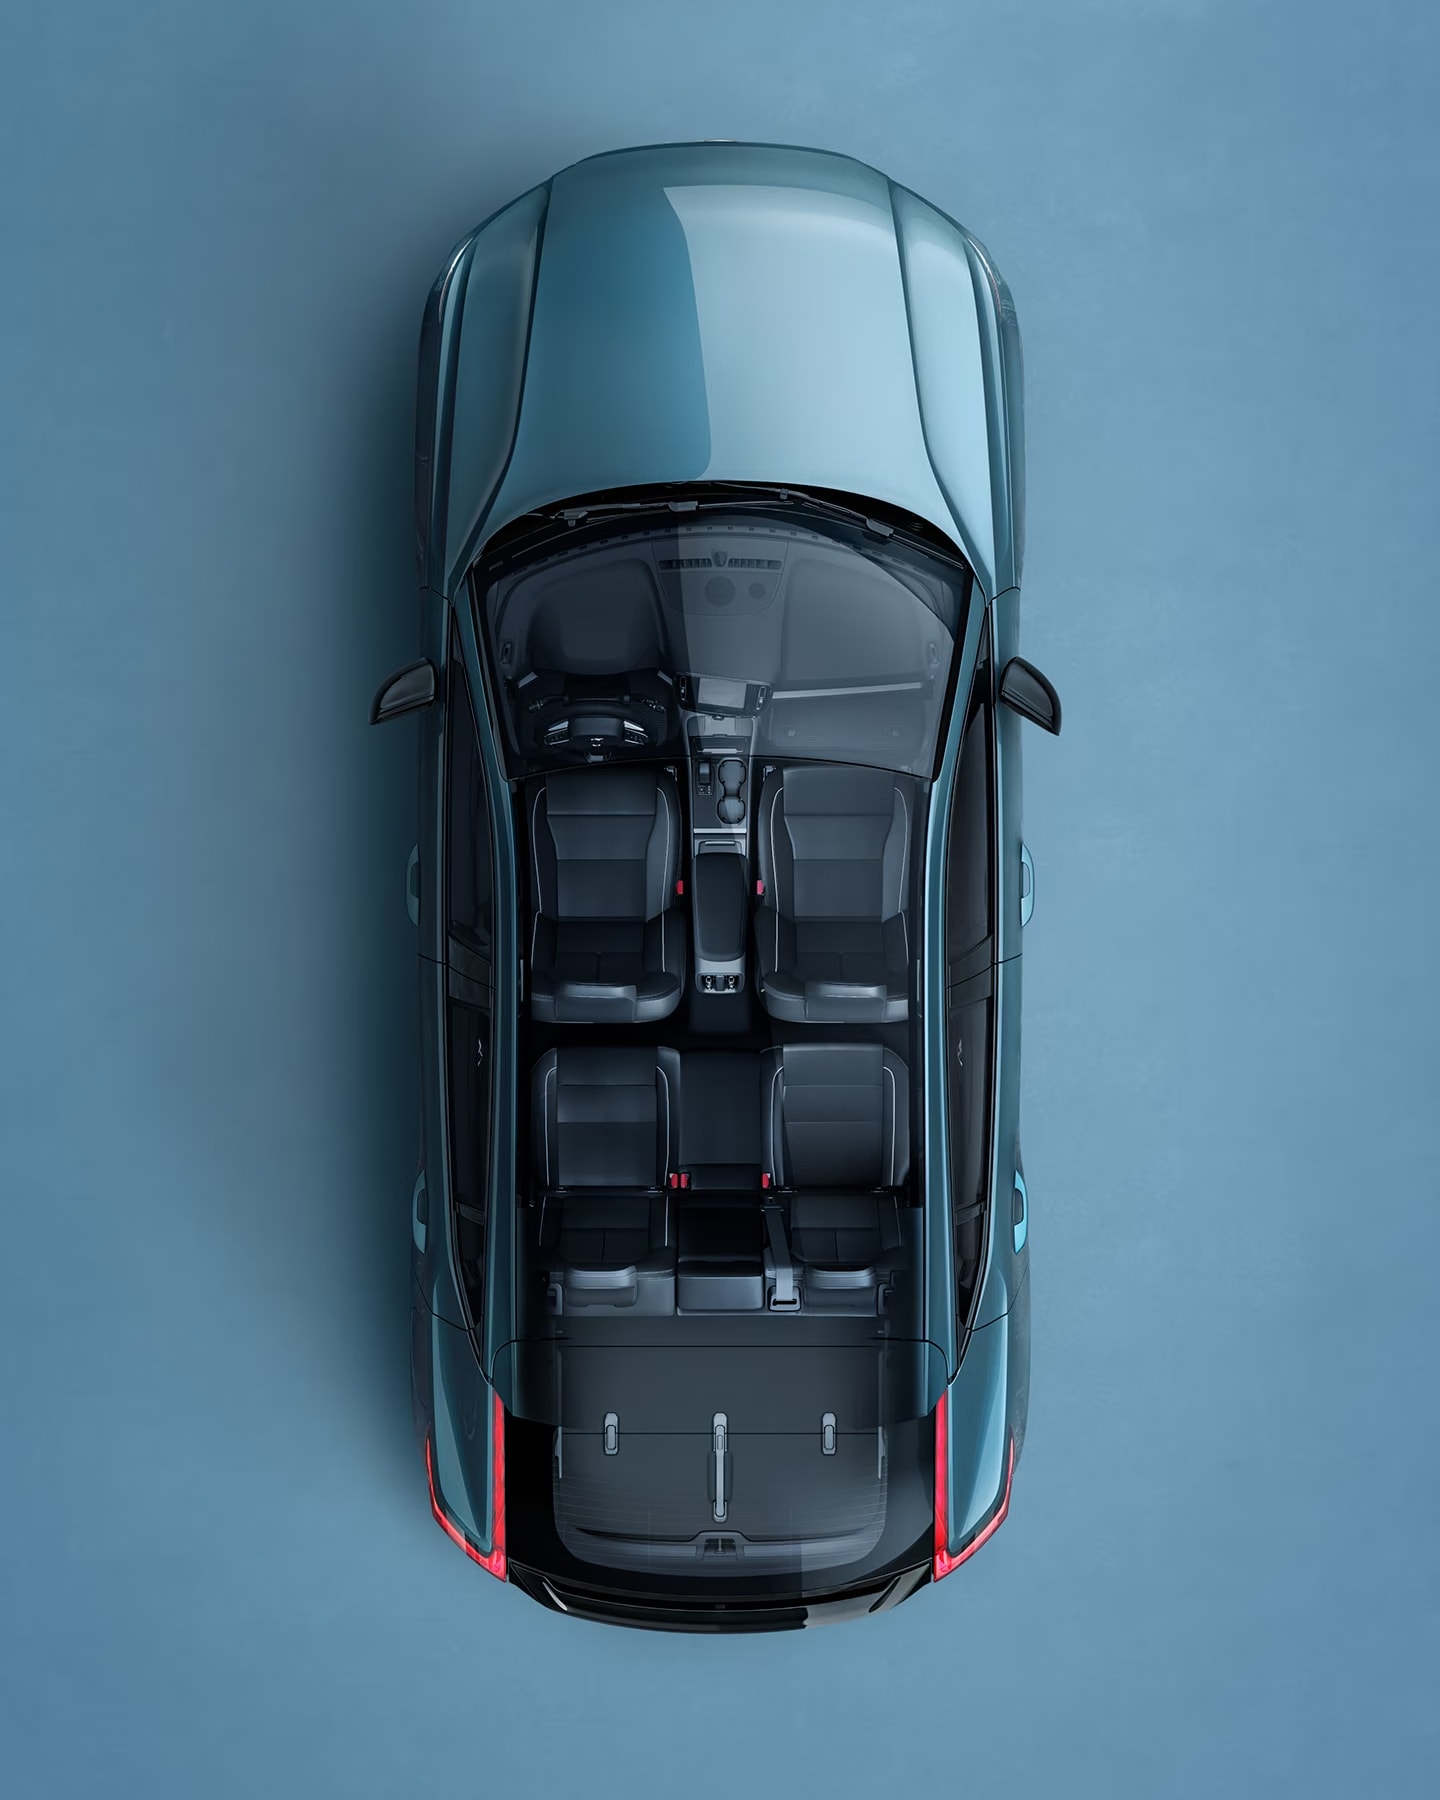 A Fjord blue Volvo C40 Recharge seen from directly above with interior visible.